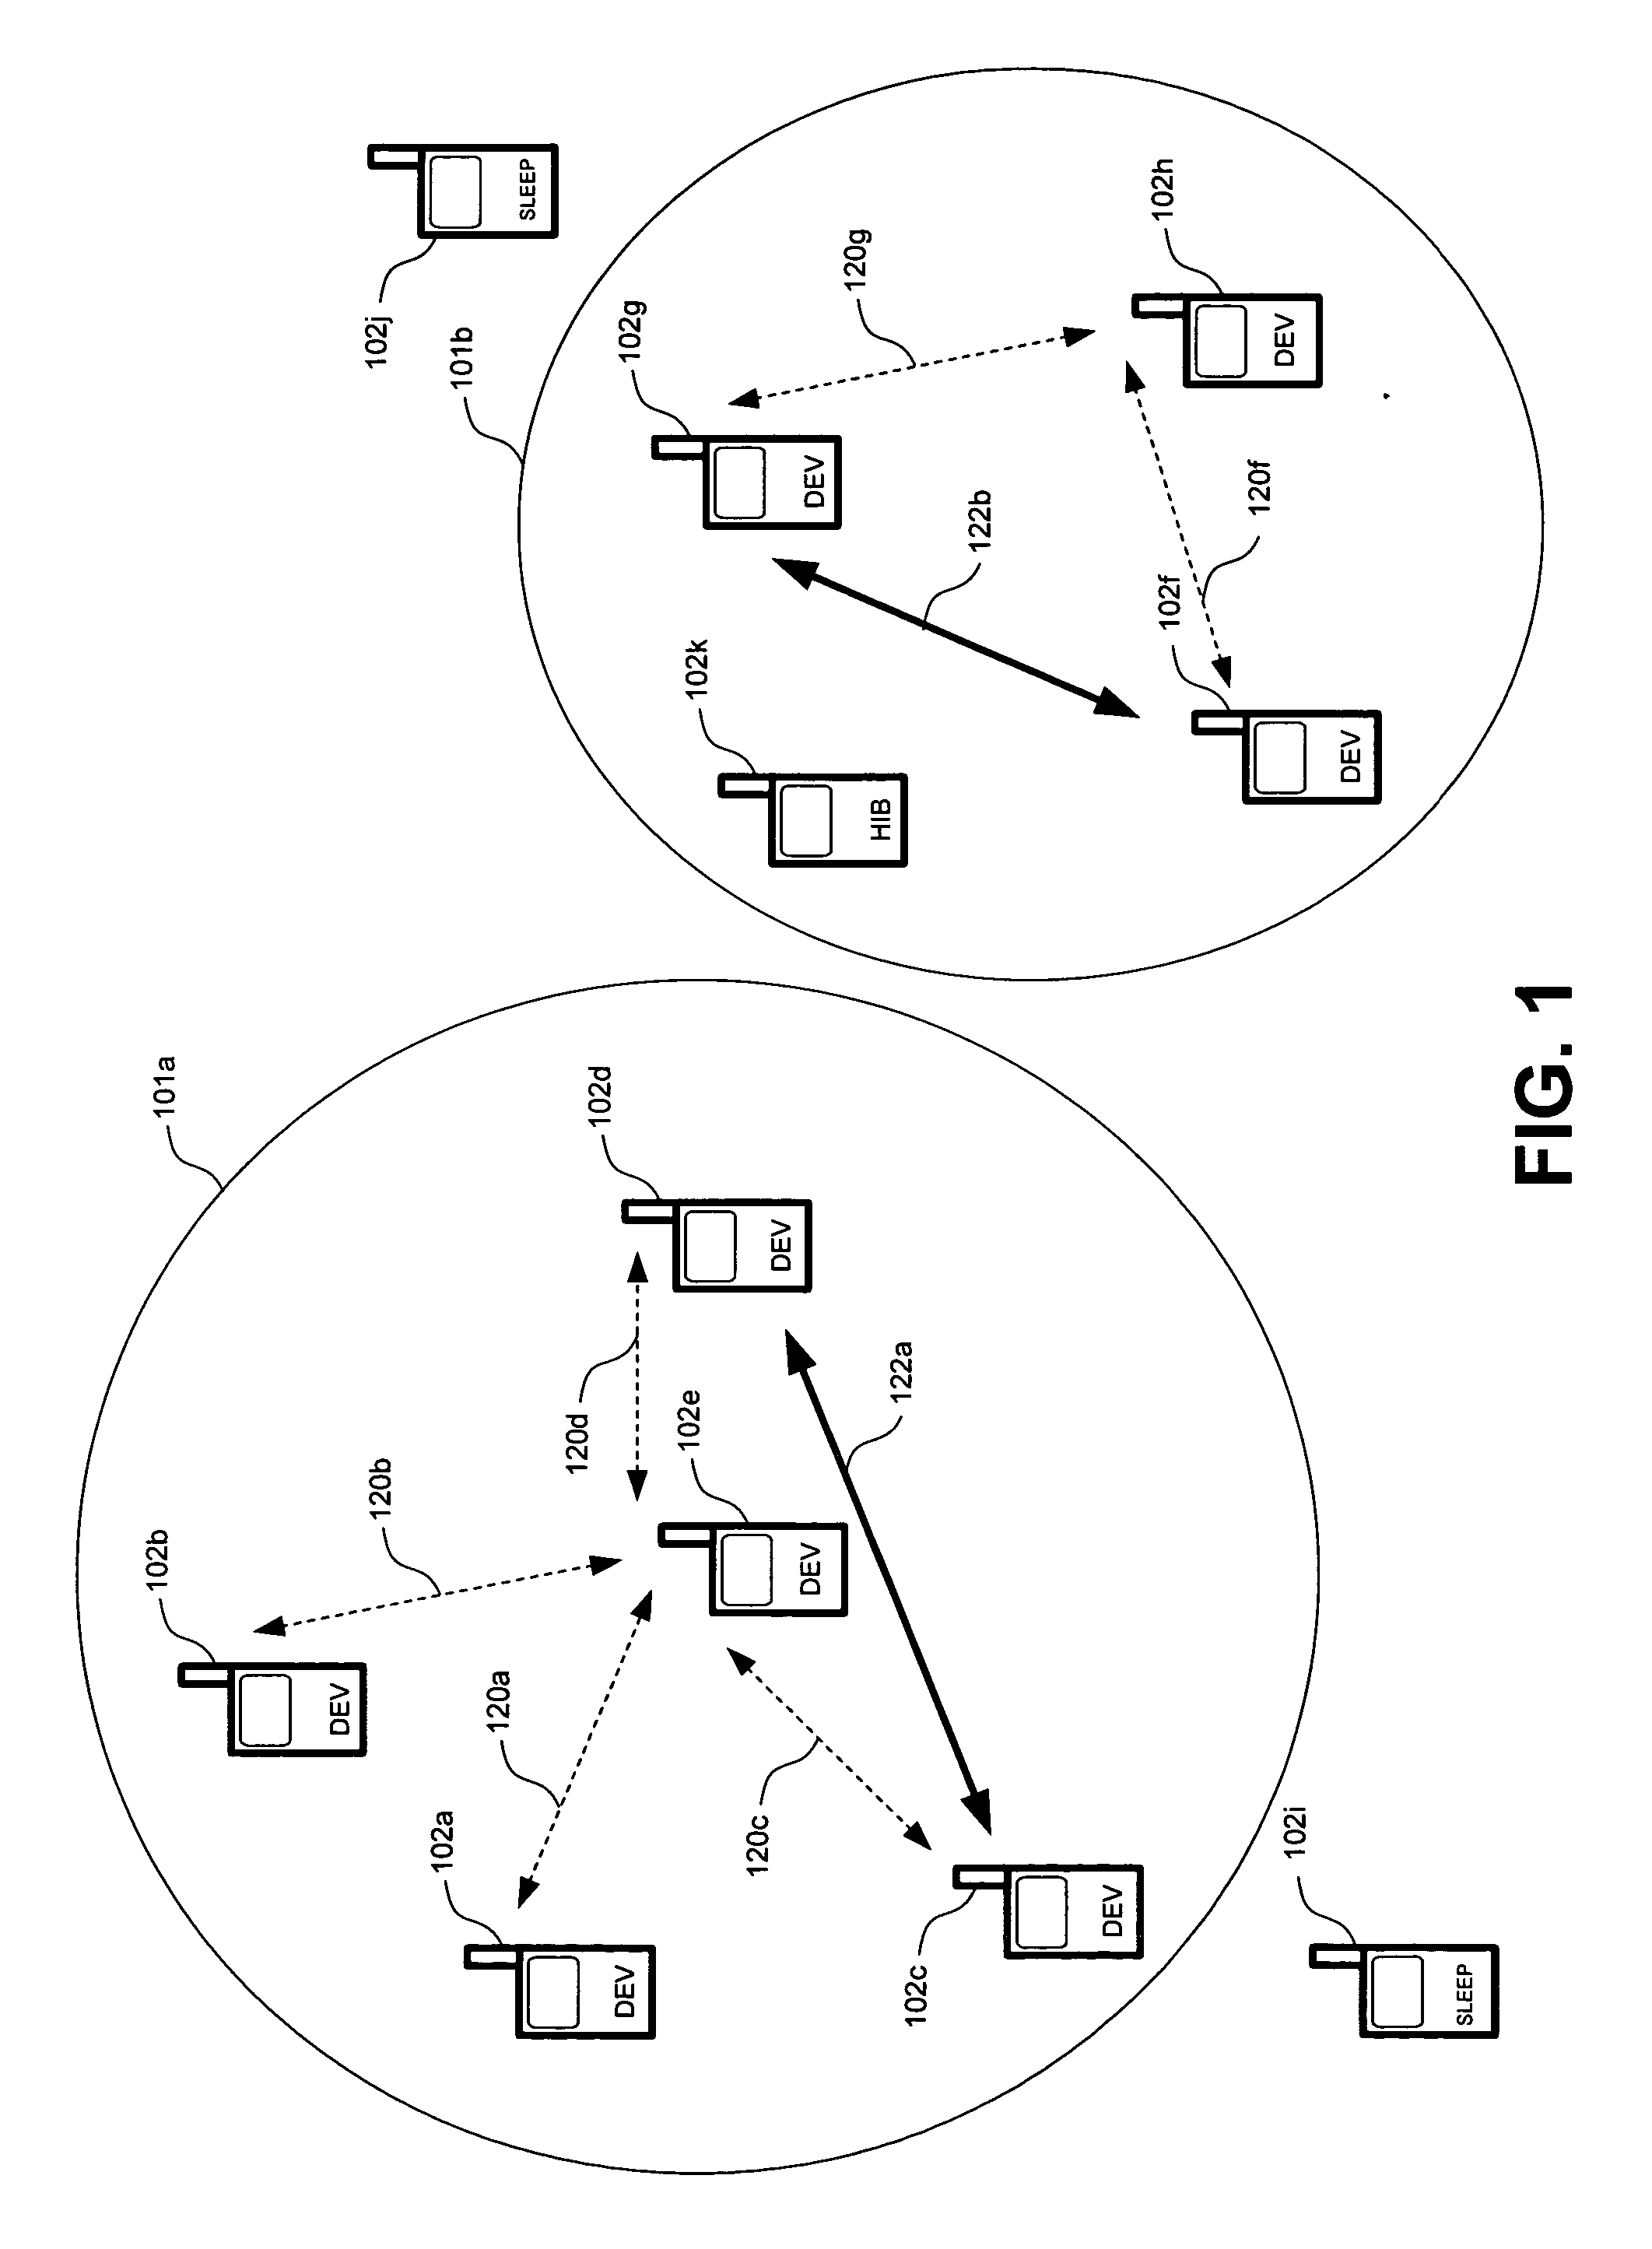 Embedding secondary transmissions in an existing wireless communications network